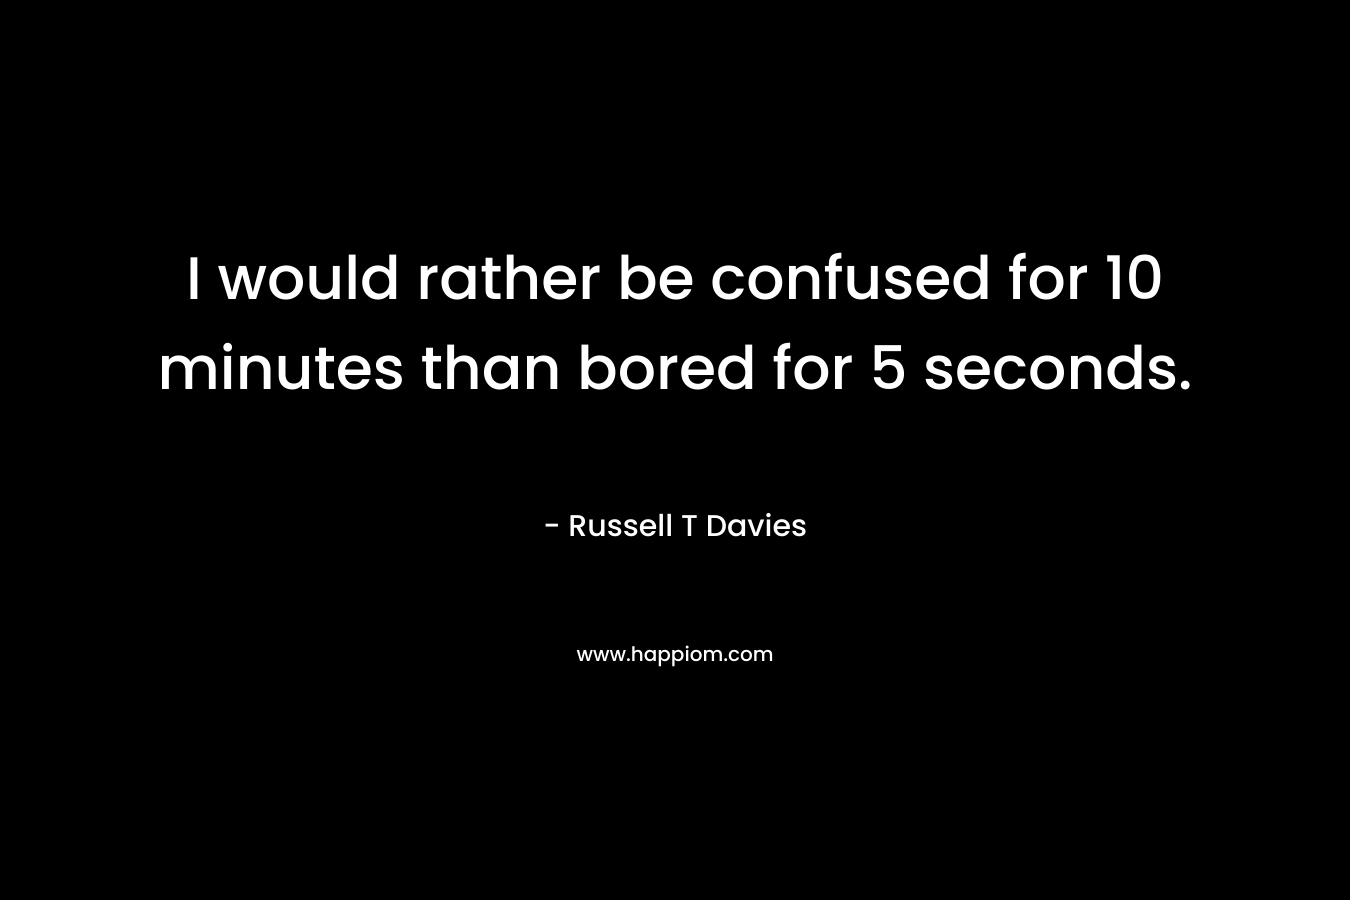 I would rather be confused for 10 minutes than bored for 5 seconds.